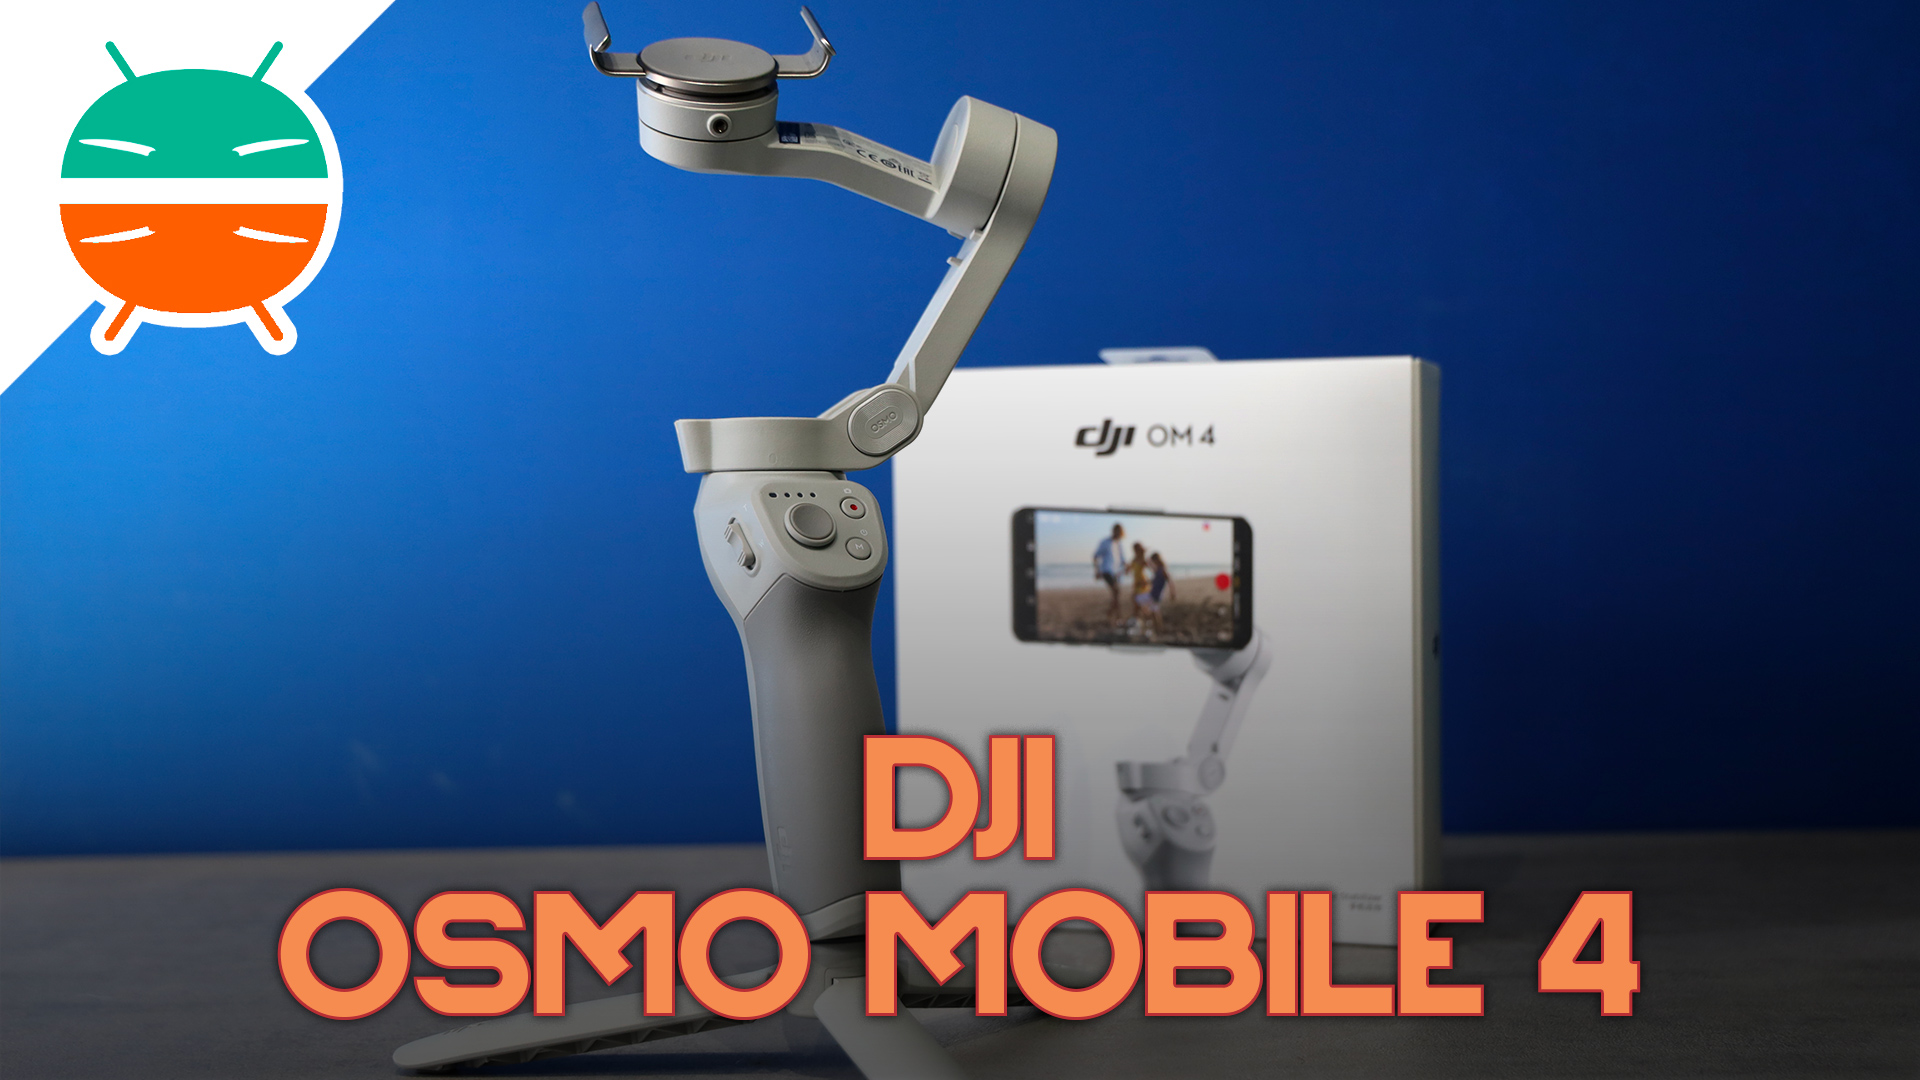 DJI Osmo Mobile review: many news, usual limits higher price) - GizChina.it